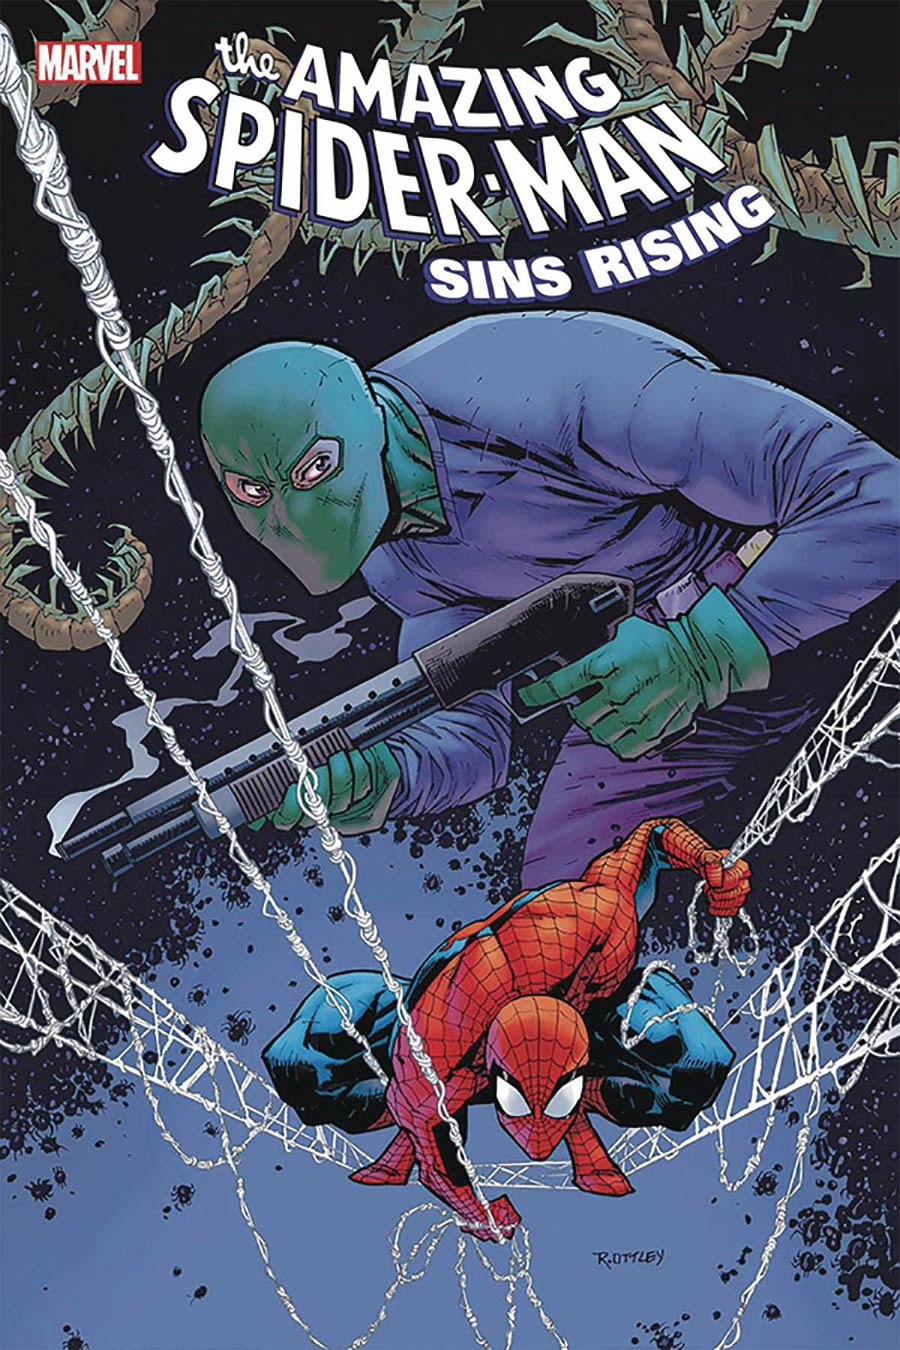 Amazing Spider-Man Sins Rising Prelude #1 Cover C DF Signed By Nick Spencer